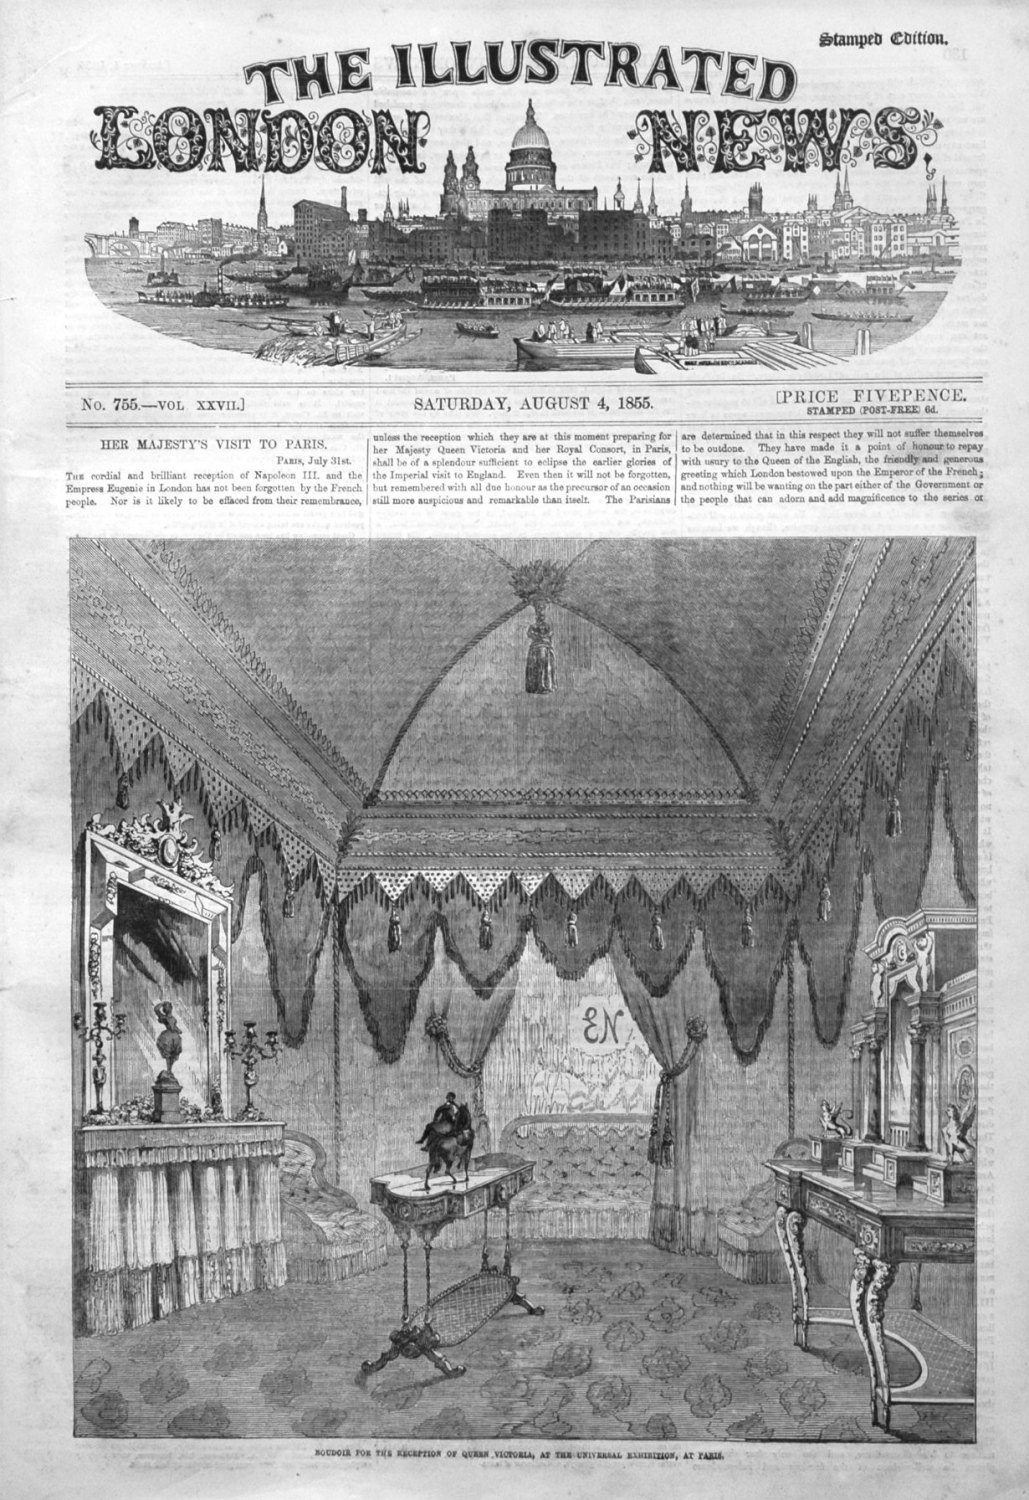 Illustrated London News with Supplement for August 4th 1855.